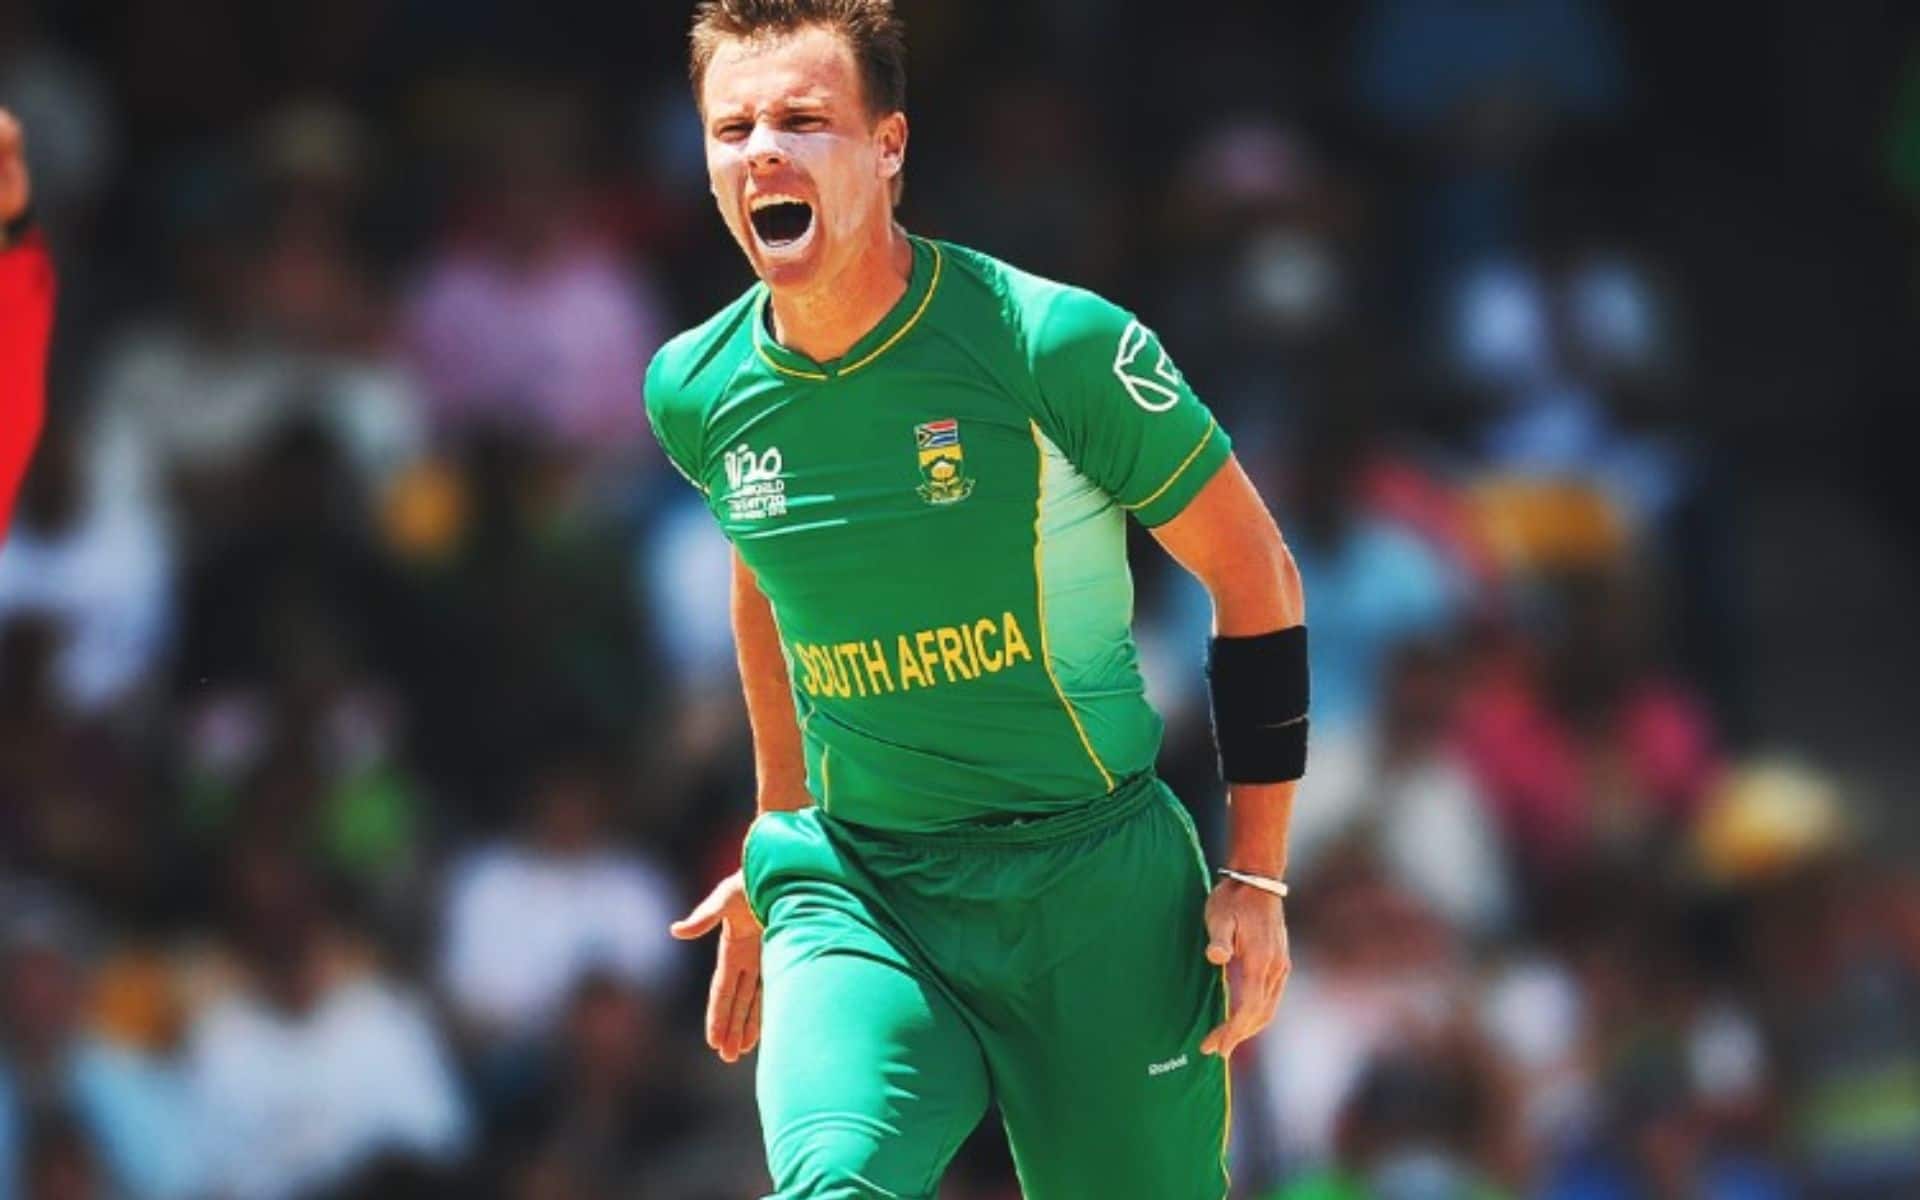 Botha has highest win percentage for SA T20I captains with at least 10 matches (x.com)